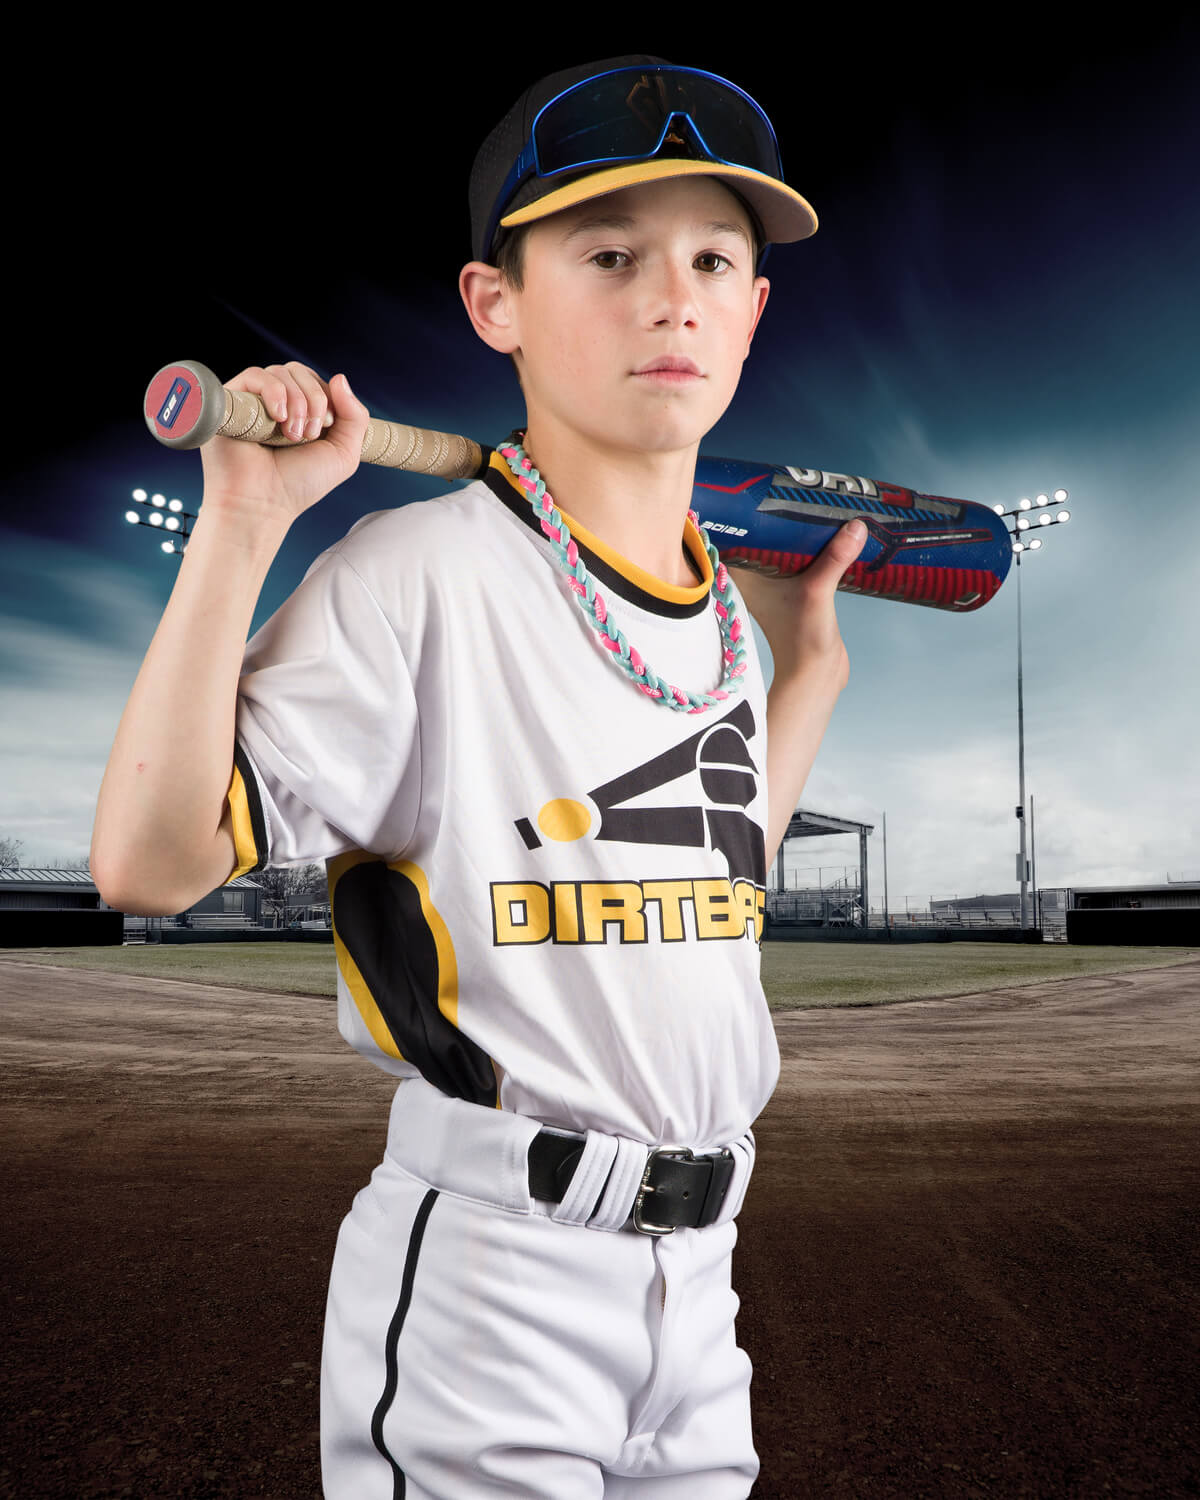 Little league baseball and Cooperstown baseball photography portraits